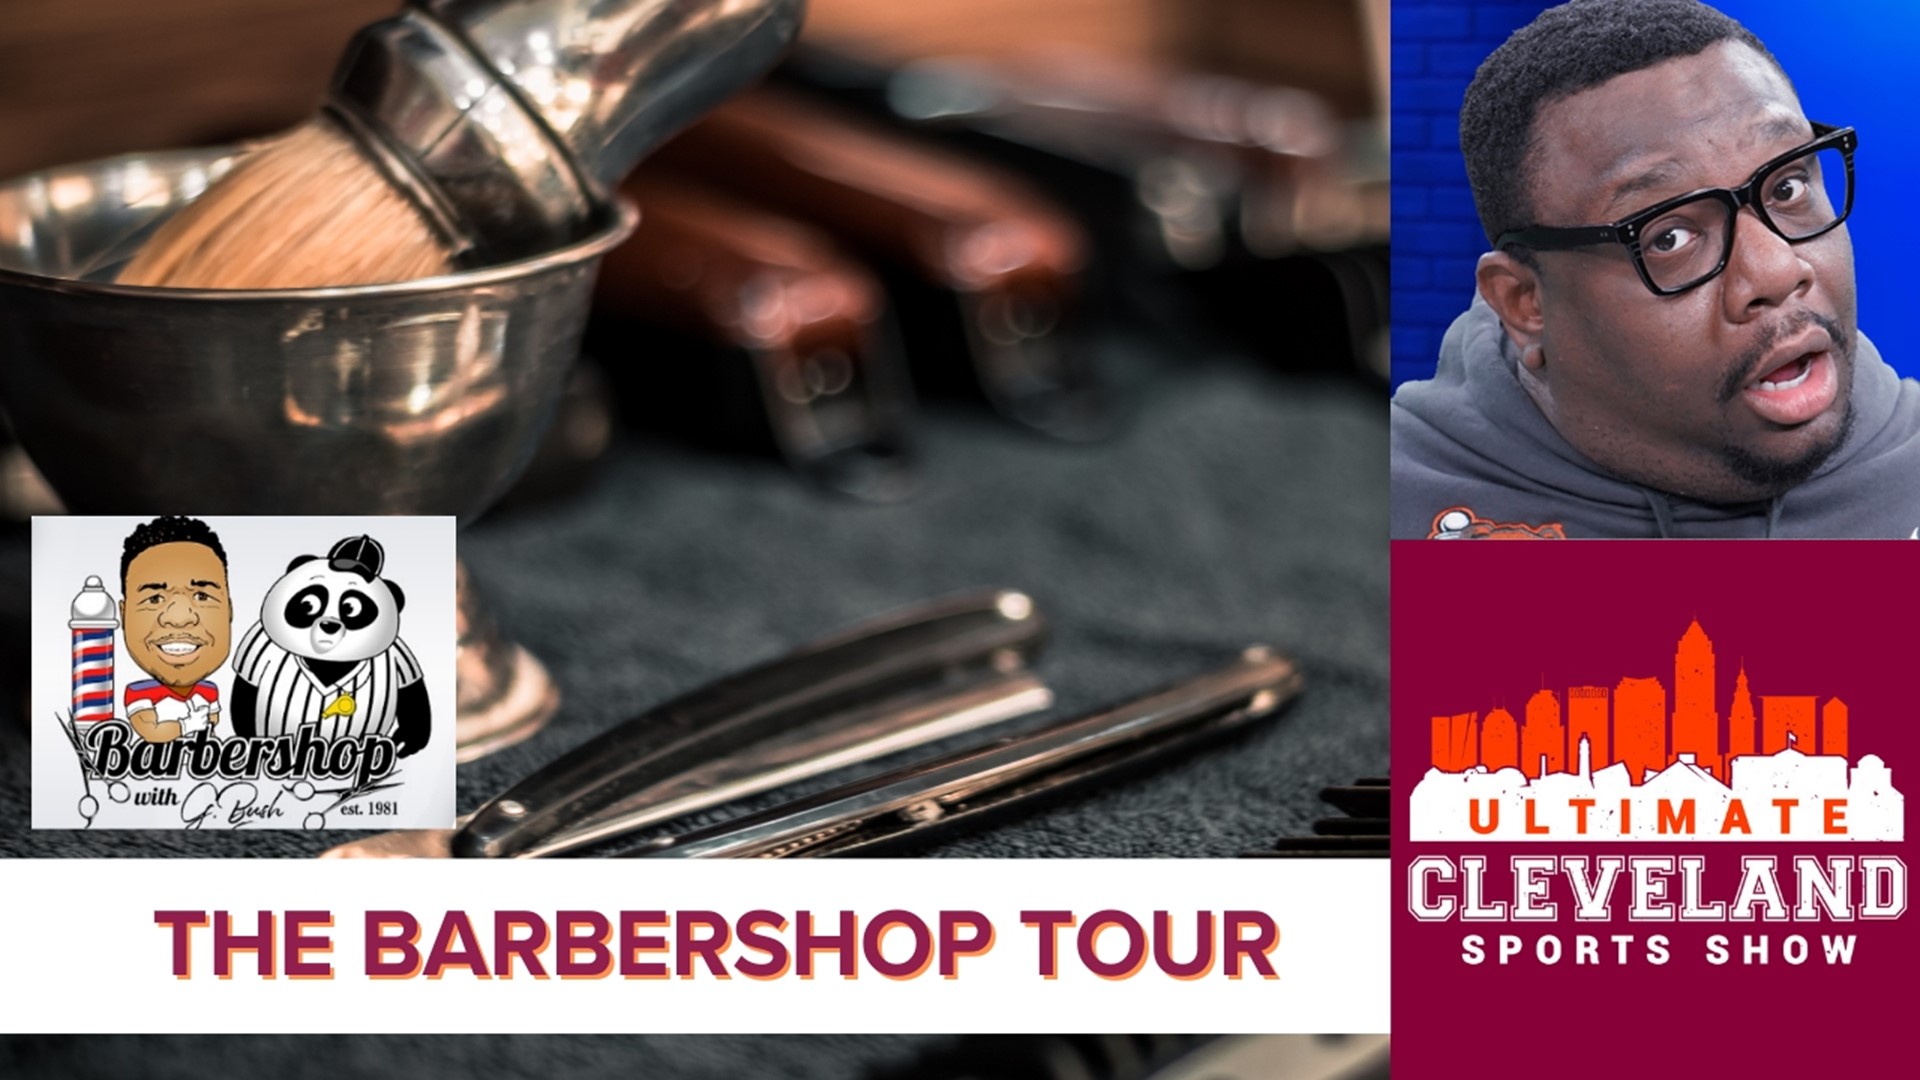 G-Bush sheds light on his Barbershop Tour where he will bring together business owners from the community to celebrate and support one another.